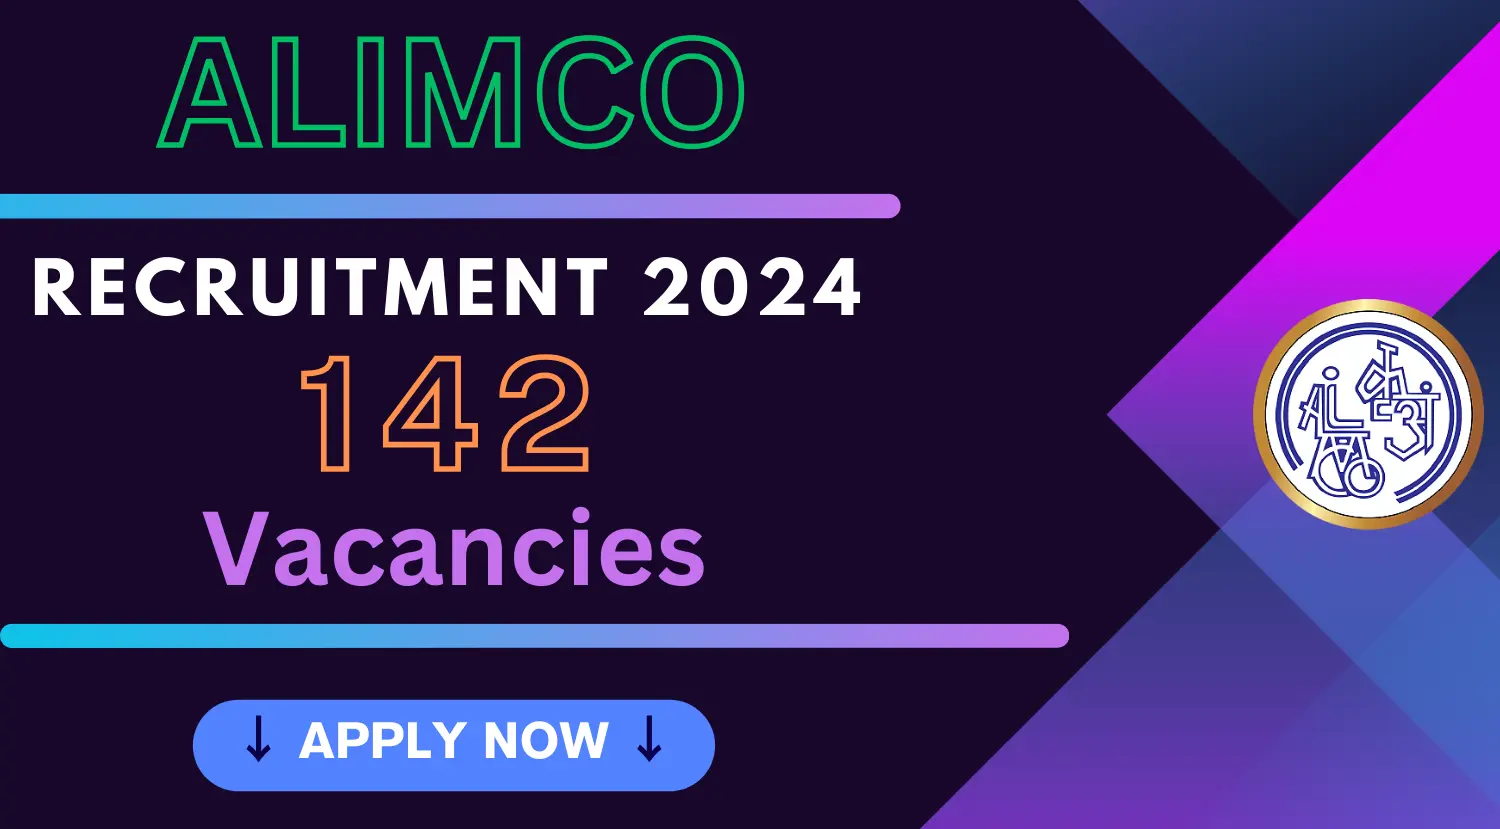 ALIMCO Recruitment 2024 Notification Out for 142 Vacancies